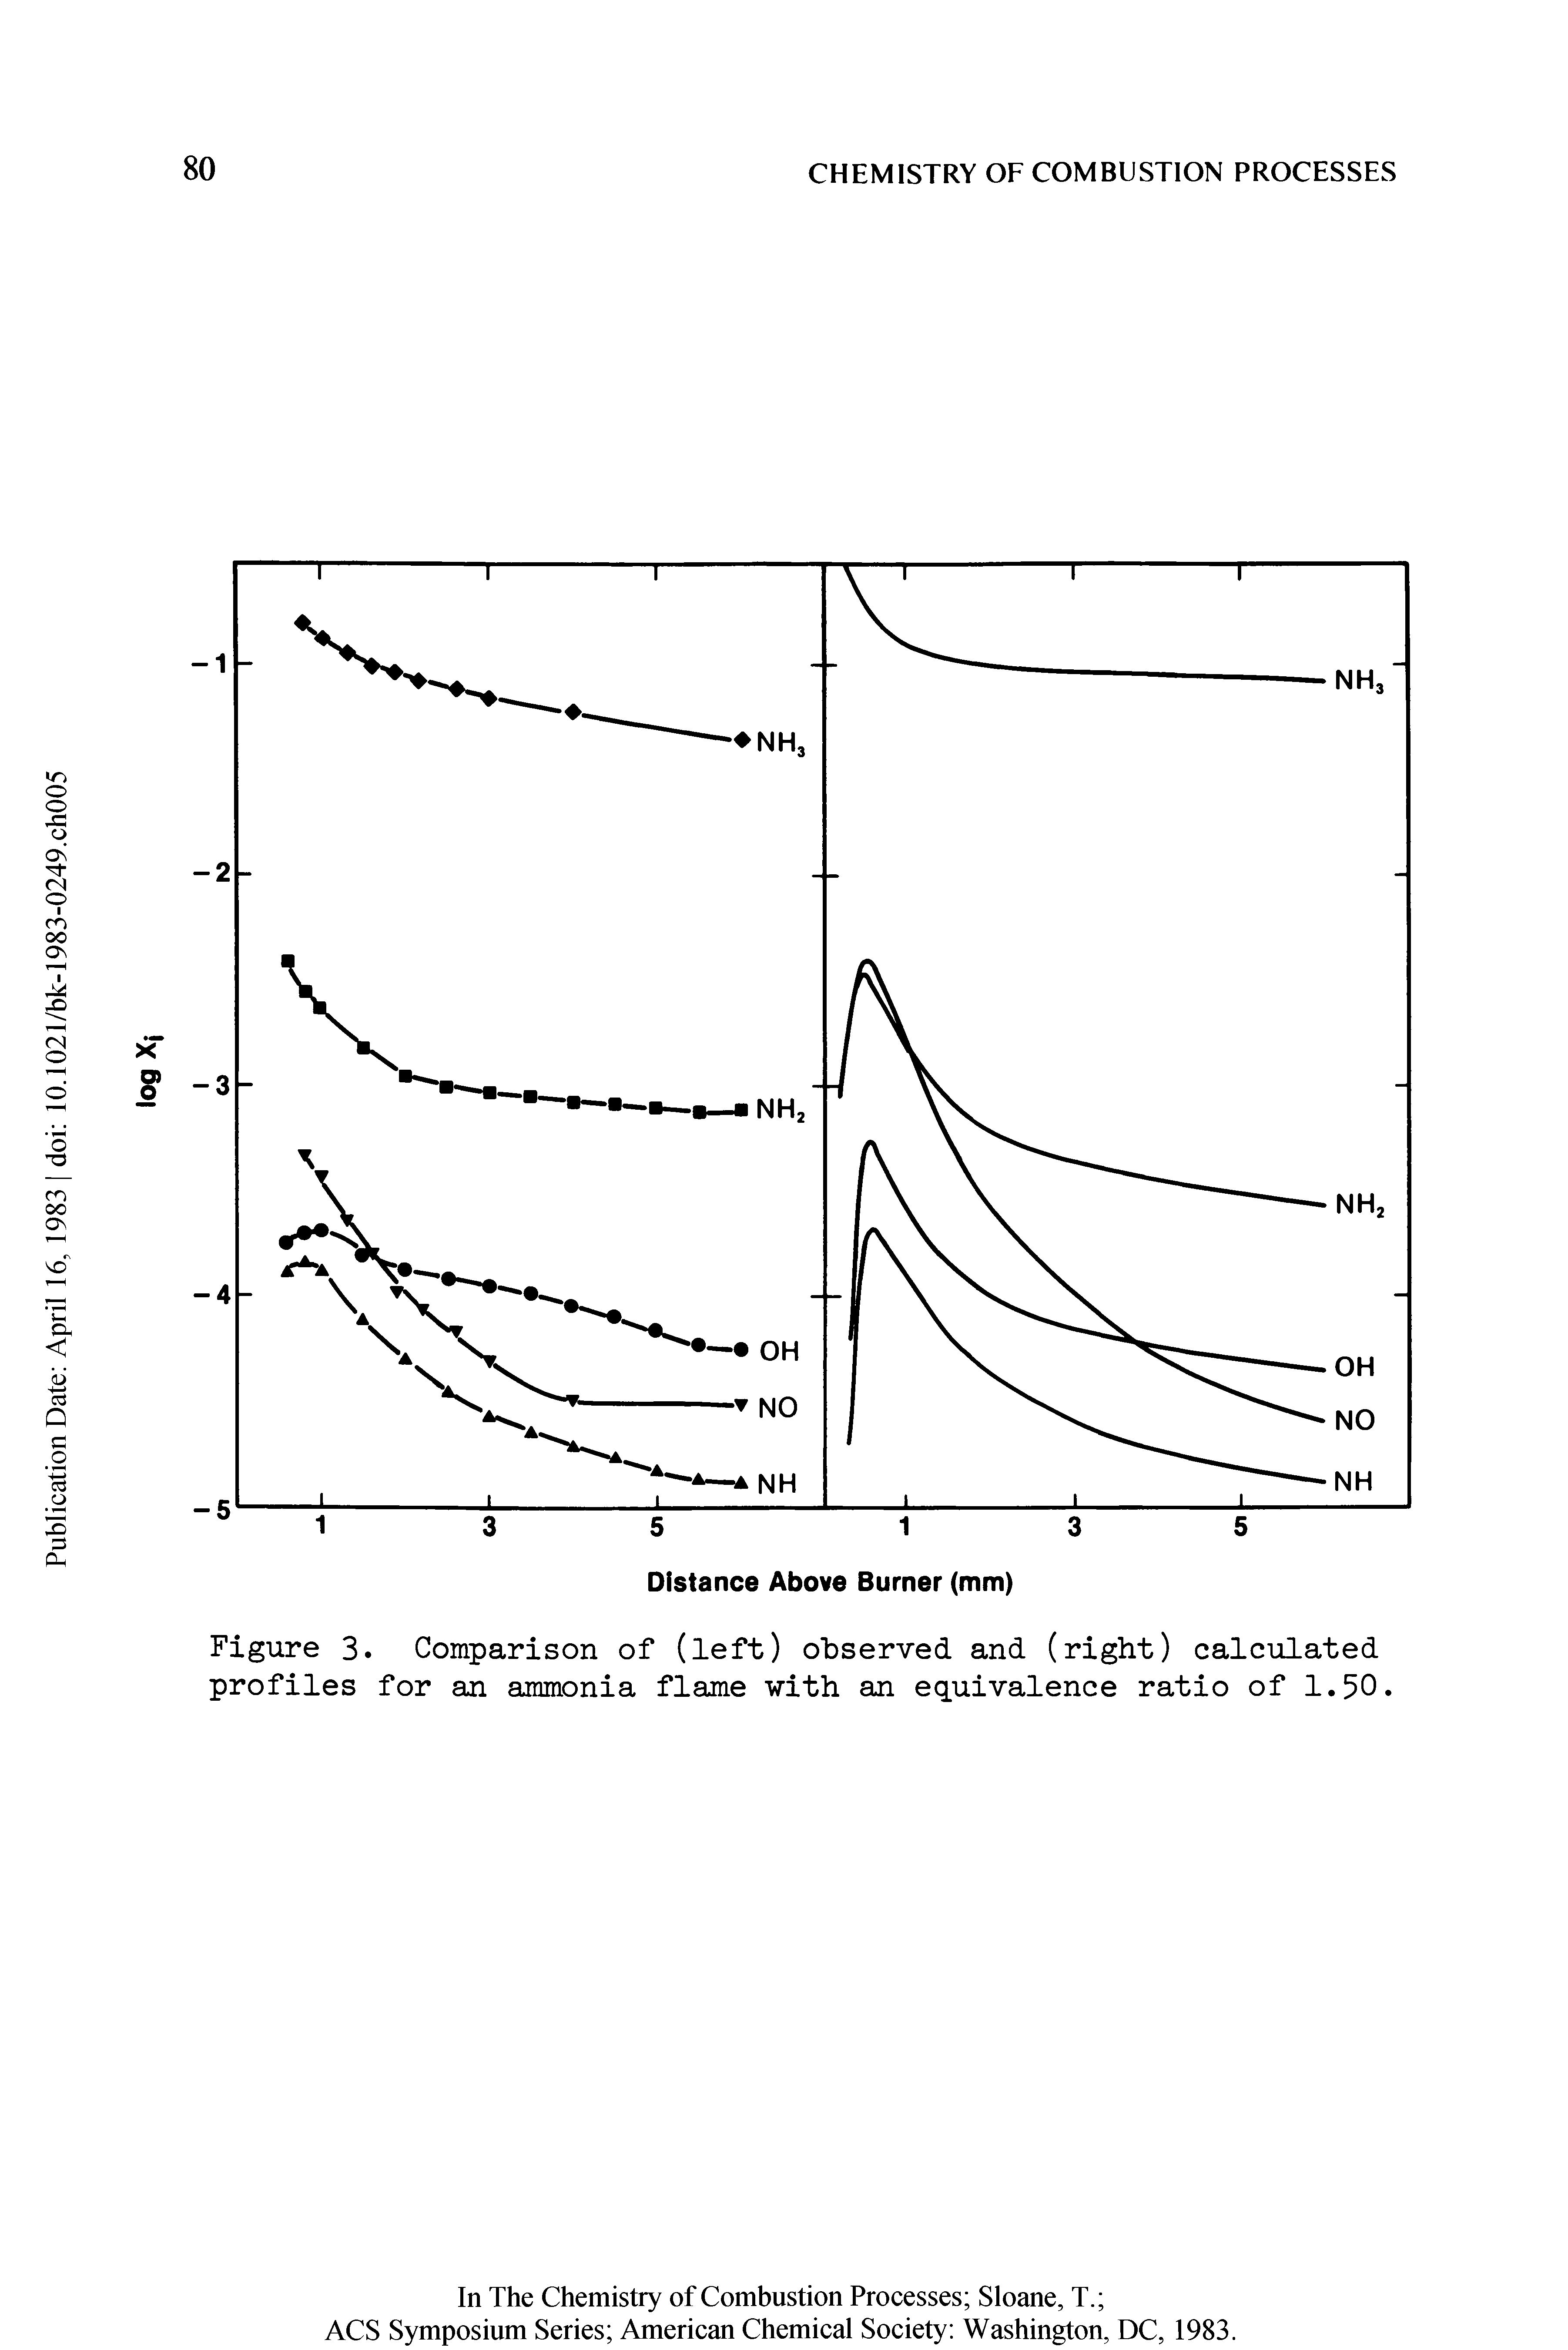 Figure 3. Comparison of (left) observed and (right) calculated profiles for an ammonia flame with an equivalence ratio of 1.50.